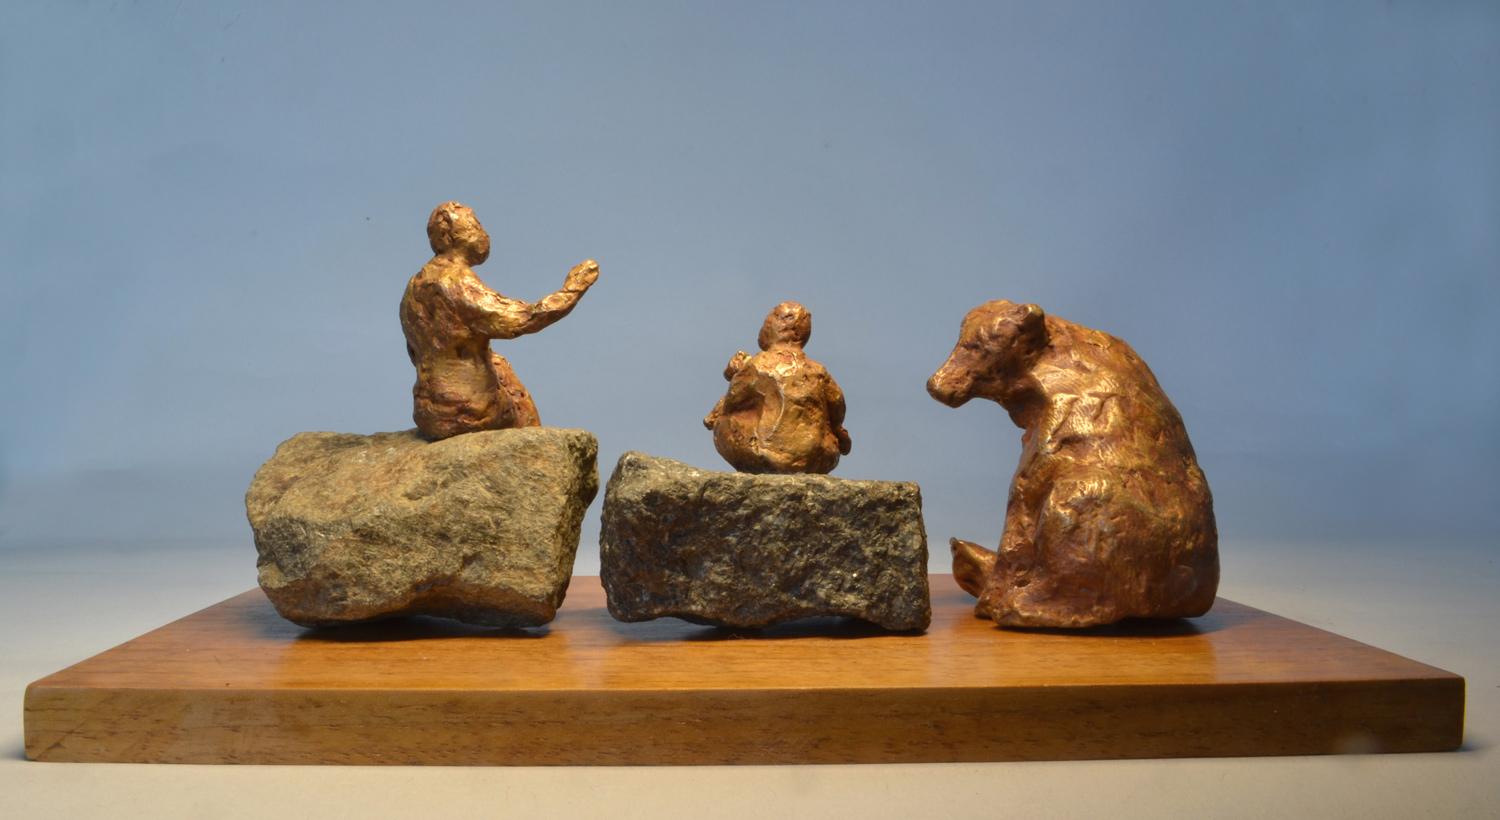 Once Upon a Time with Bear- playful interactive bronze figures  - Sculpture by Noa Bornstein